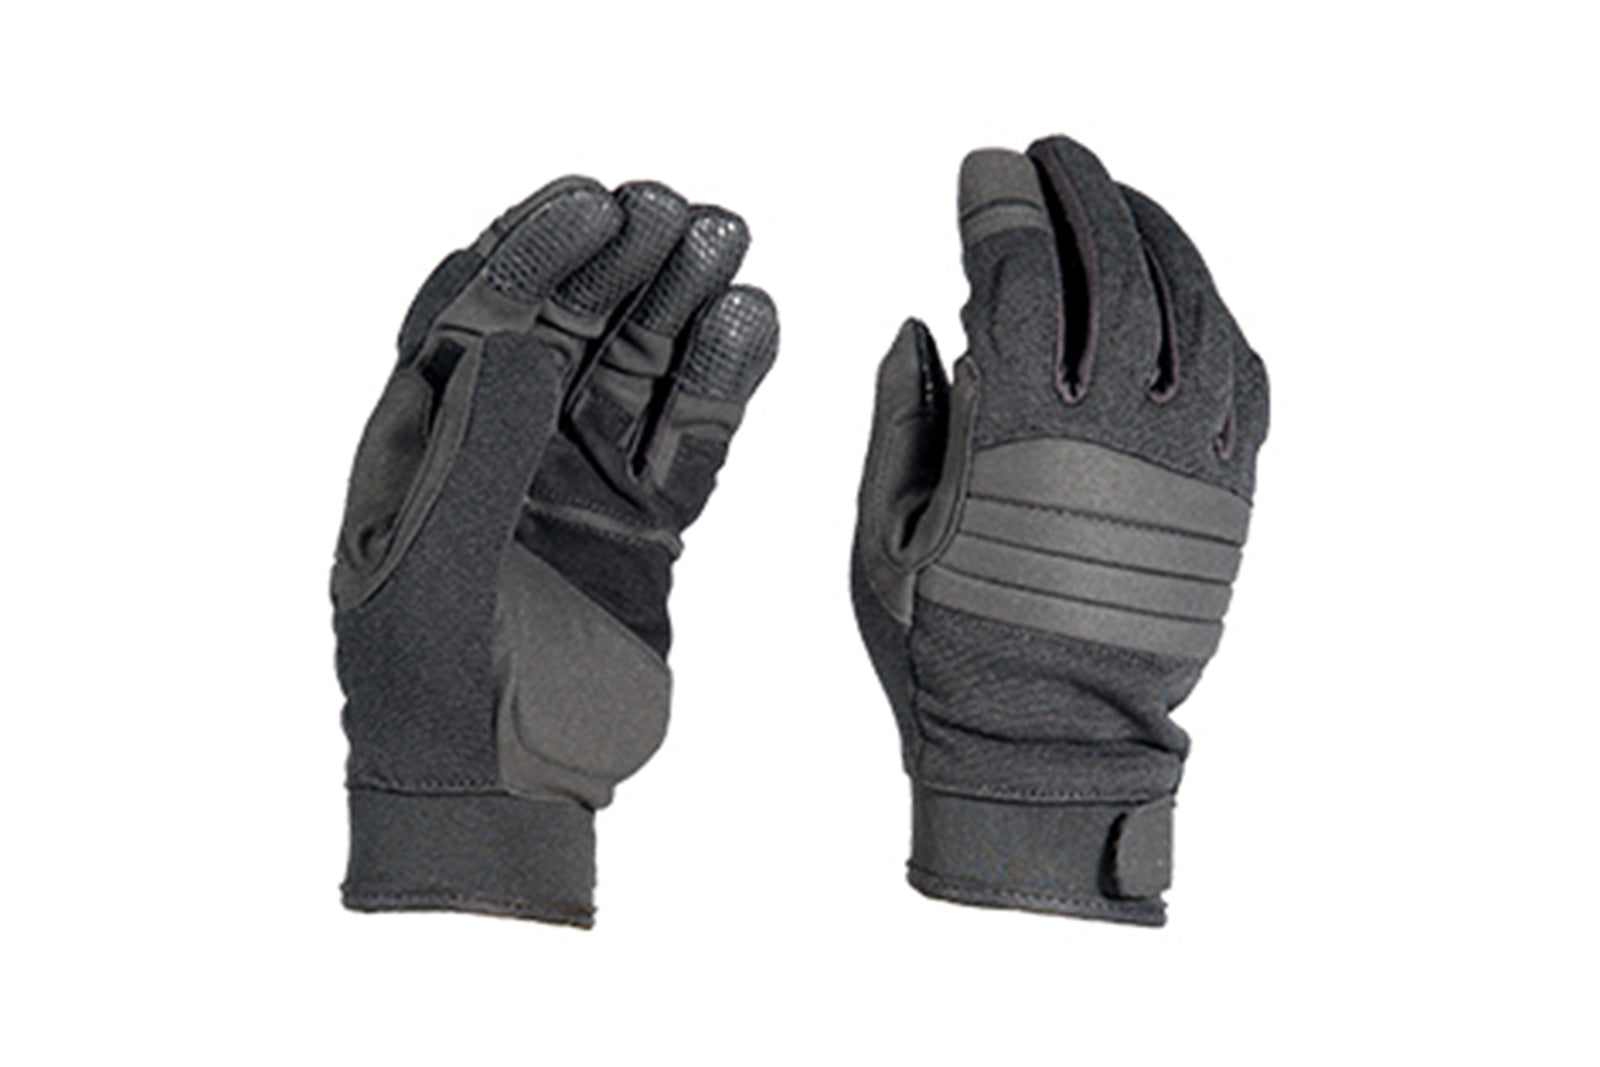 OPS TACTICAL AIRSOFT PADDED GLOVES – Simple Airsoft